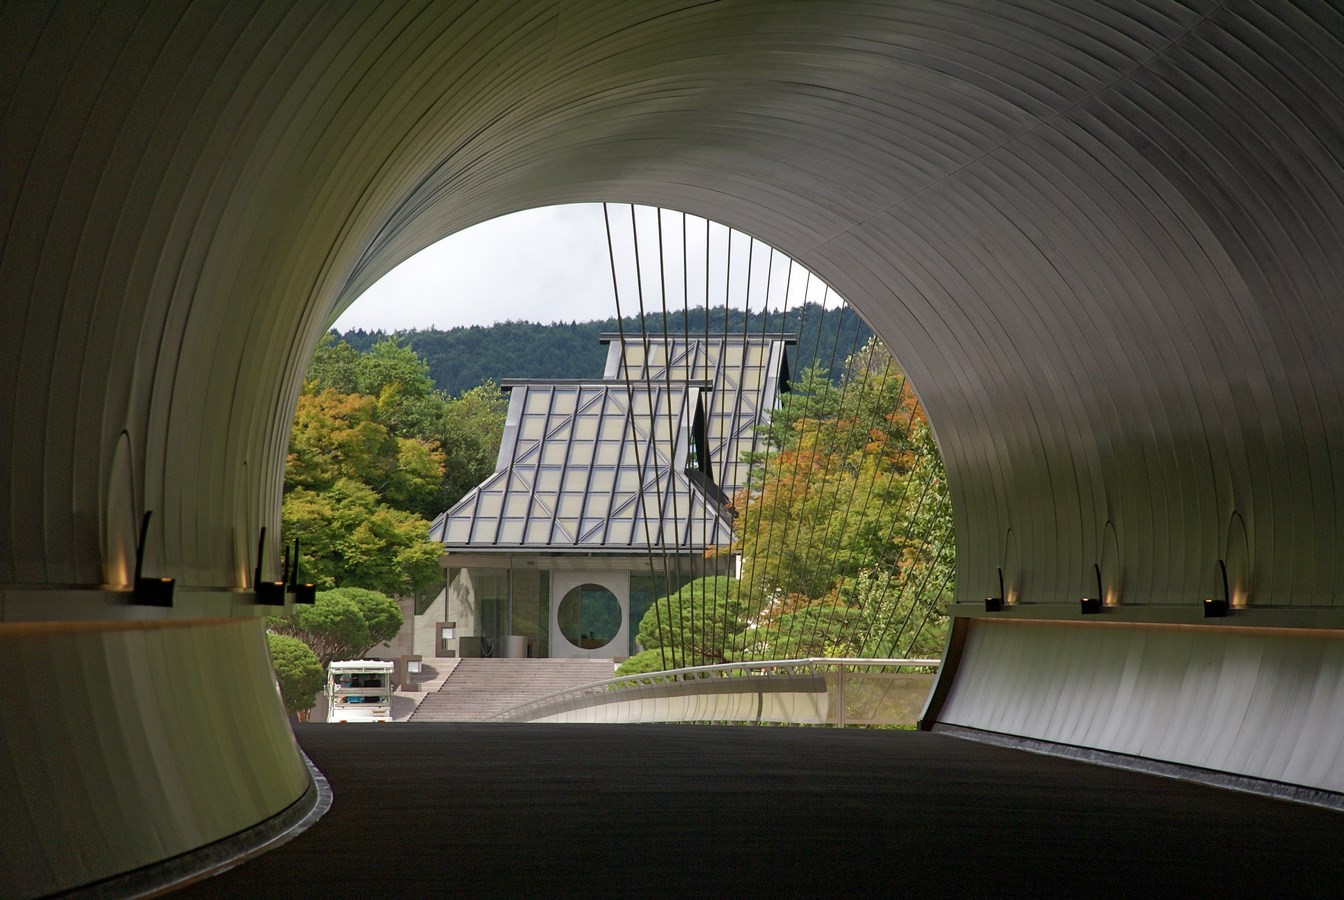 Kyoto, Japan - Jul 16, 2015. Architecture Of Miho Museum In Kyoto, Japan.  The Museum Designed By Architect I. M. Pei, Is A 17,400 M2 Building, Carved  On A Rocky Peak. Stock